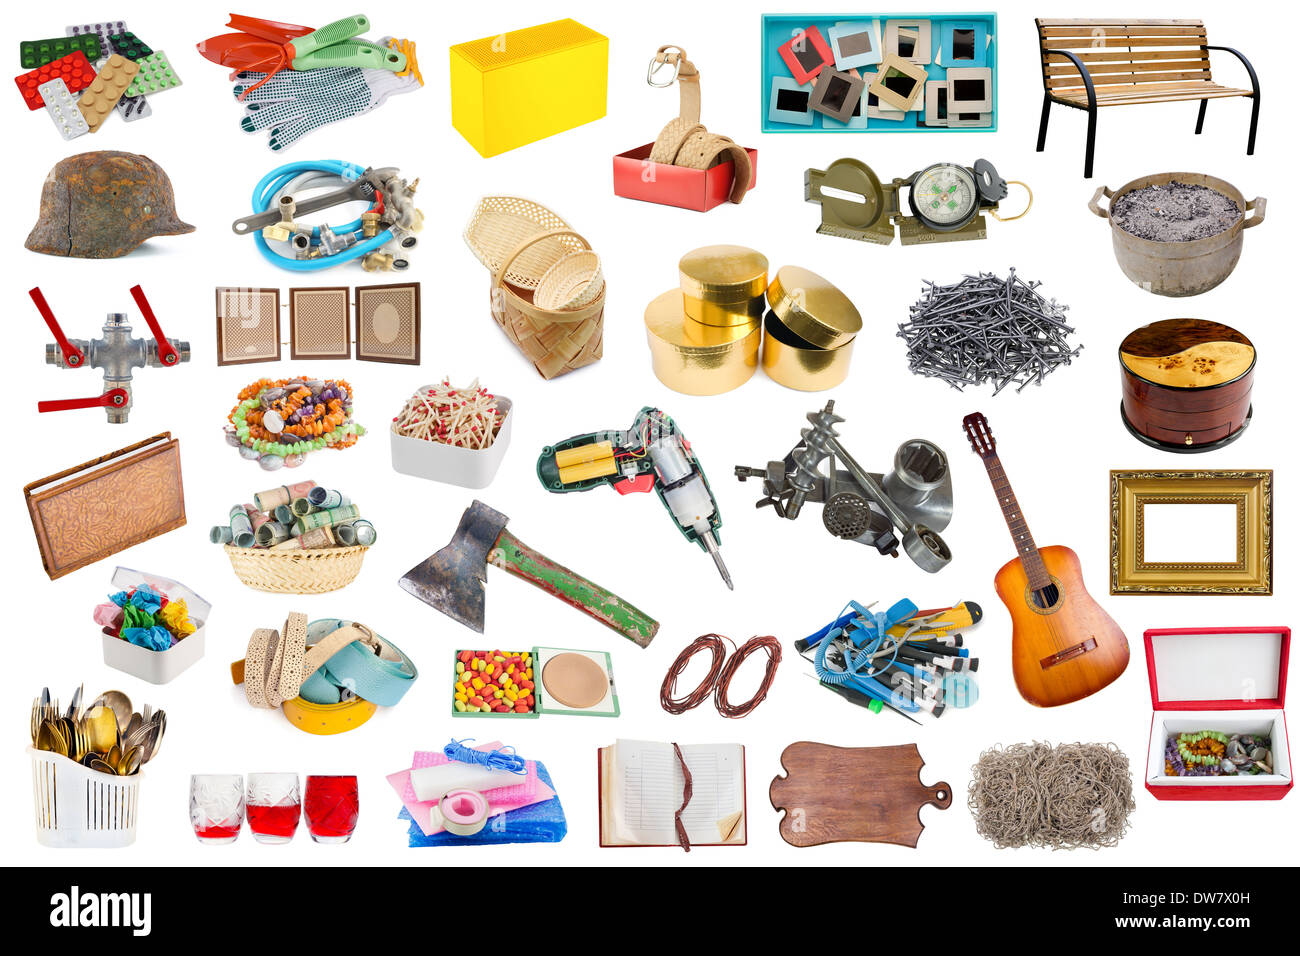 https://c8.alamy.com/comp/DW7X0H/simple-common-household-objects-and-tools-isolated-set-all-full-size-DW7X0H.jpg